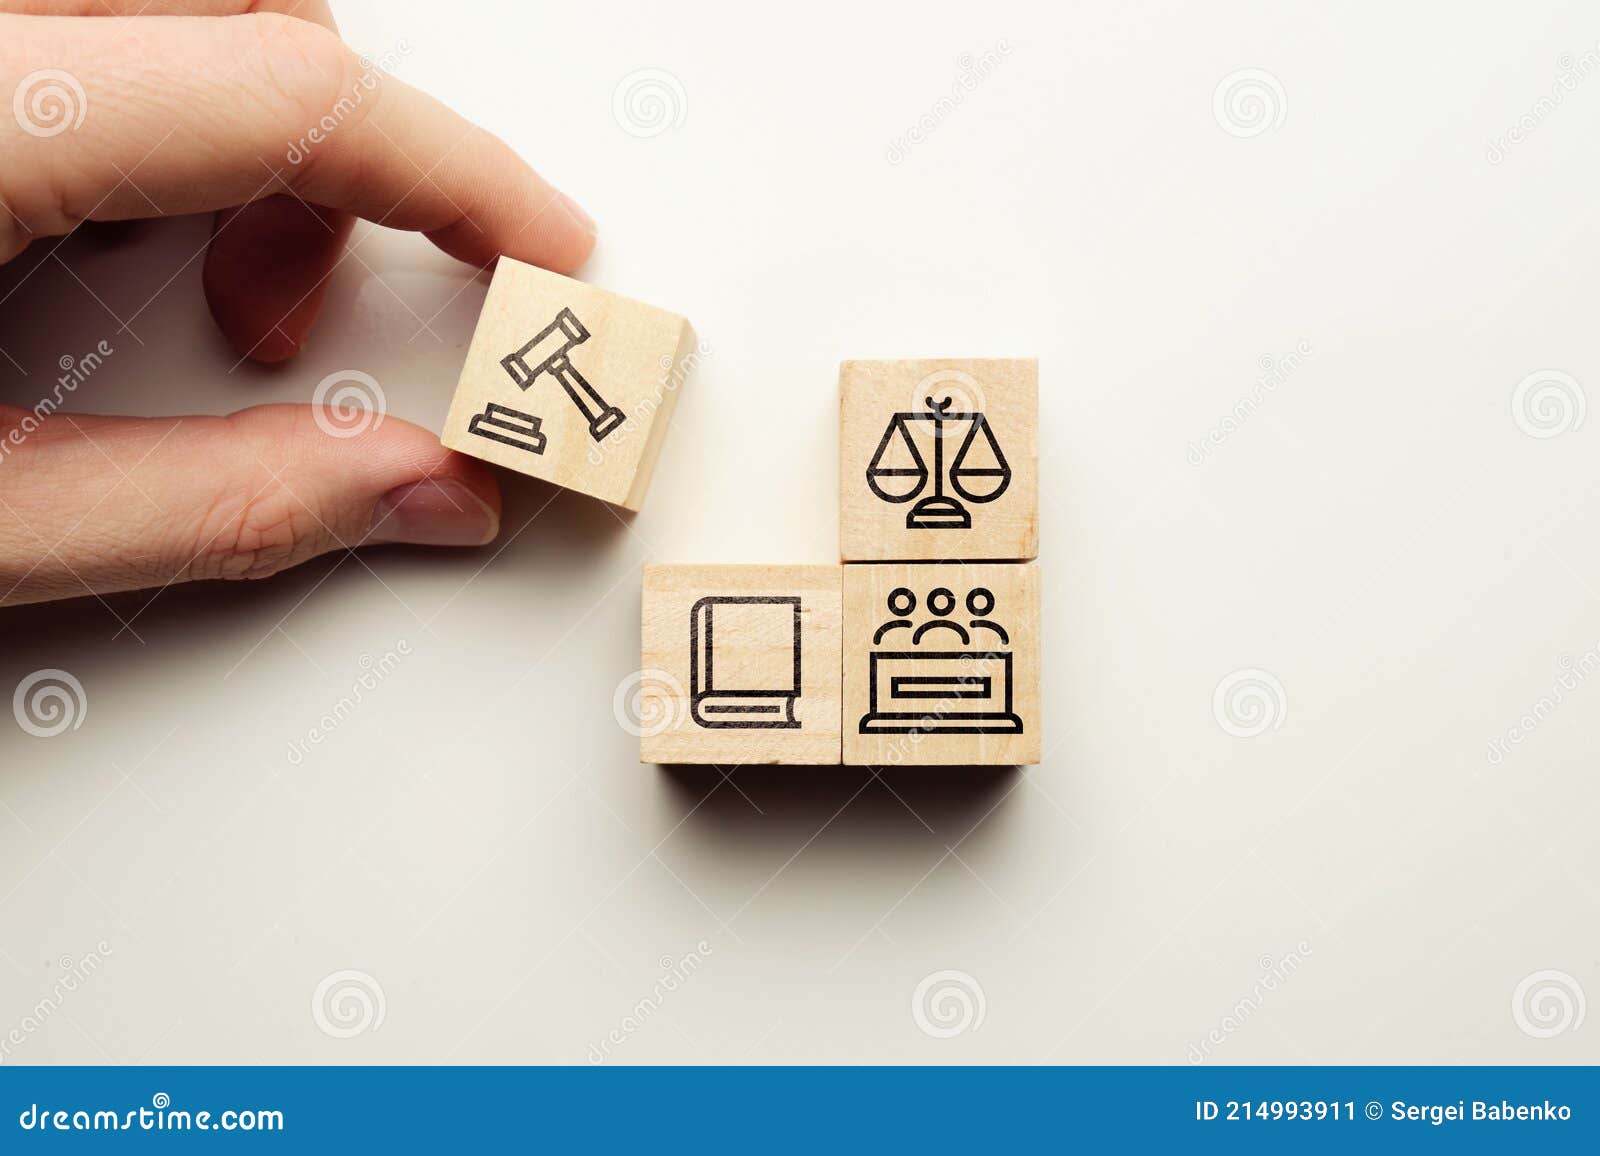 lawsuit concept with jury icons, law book on wooden cubes